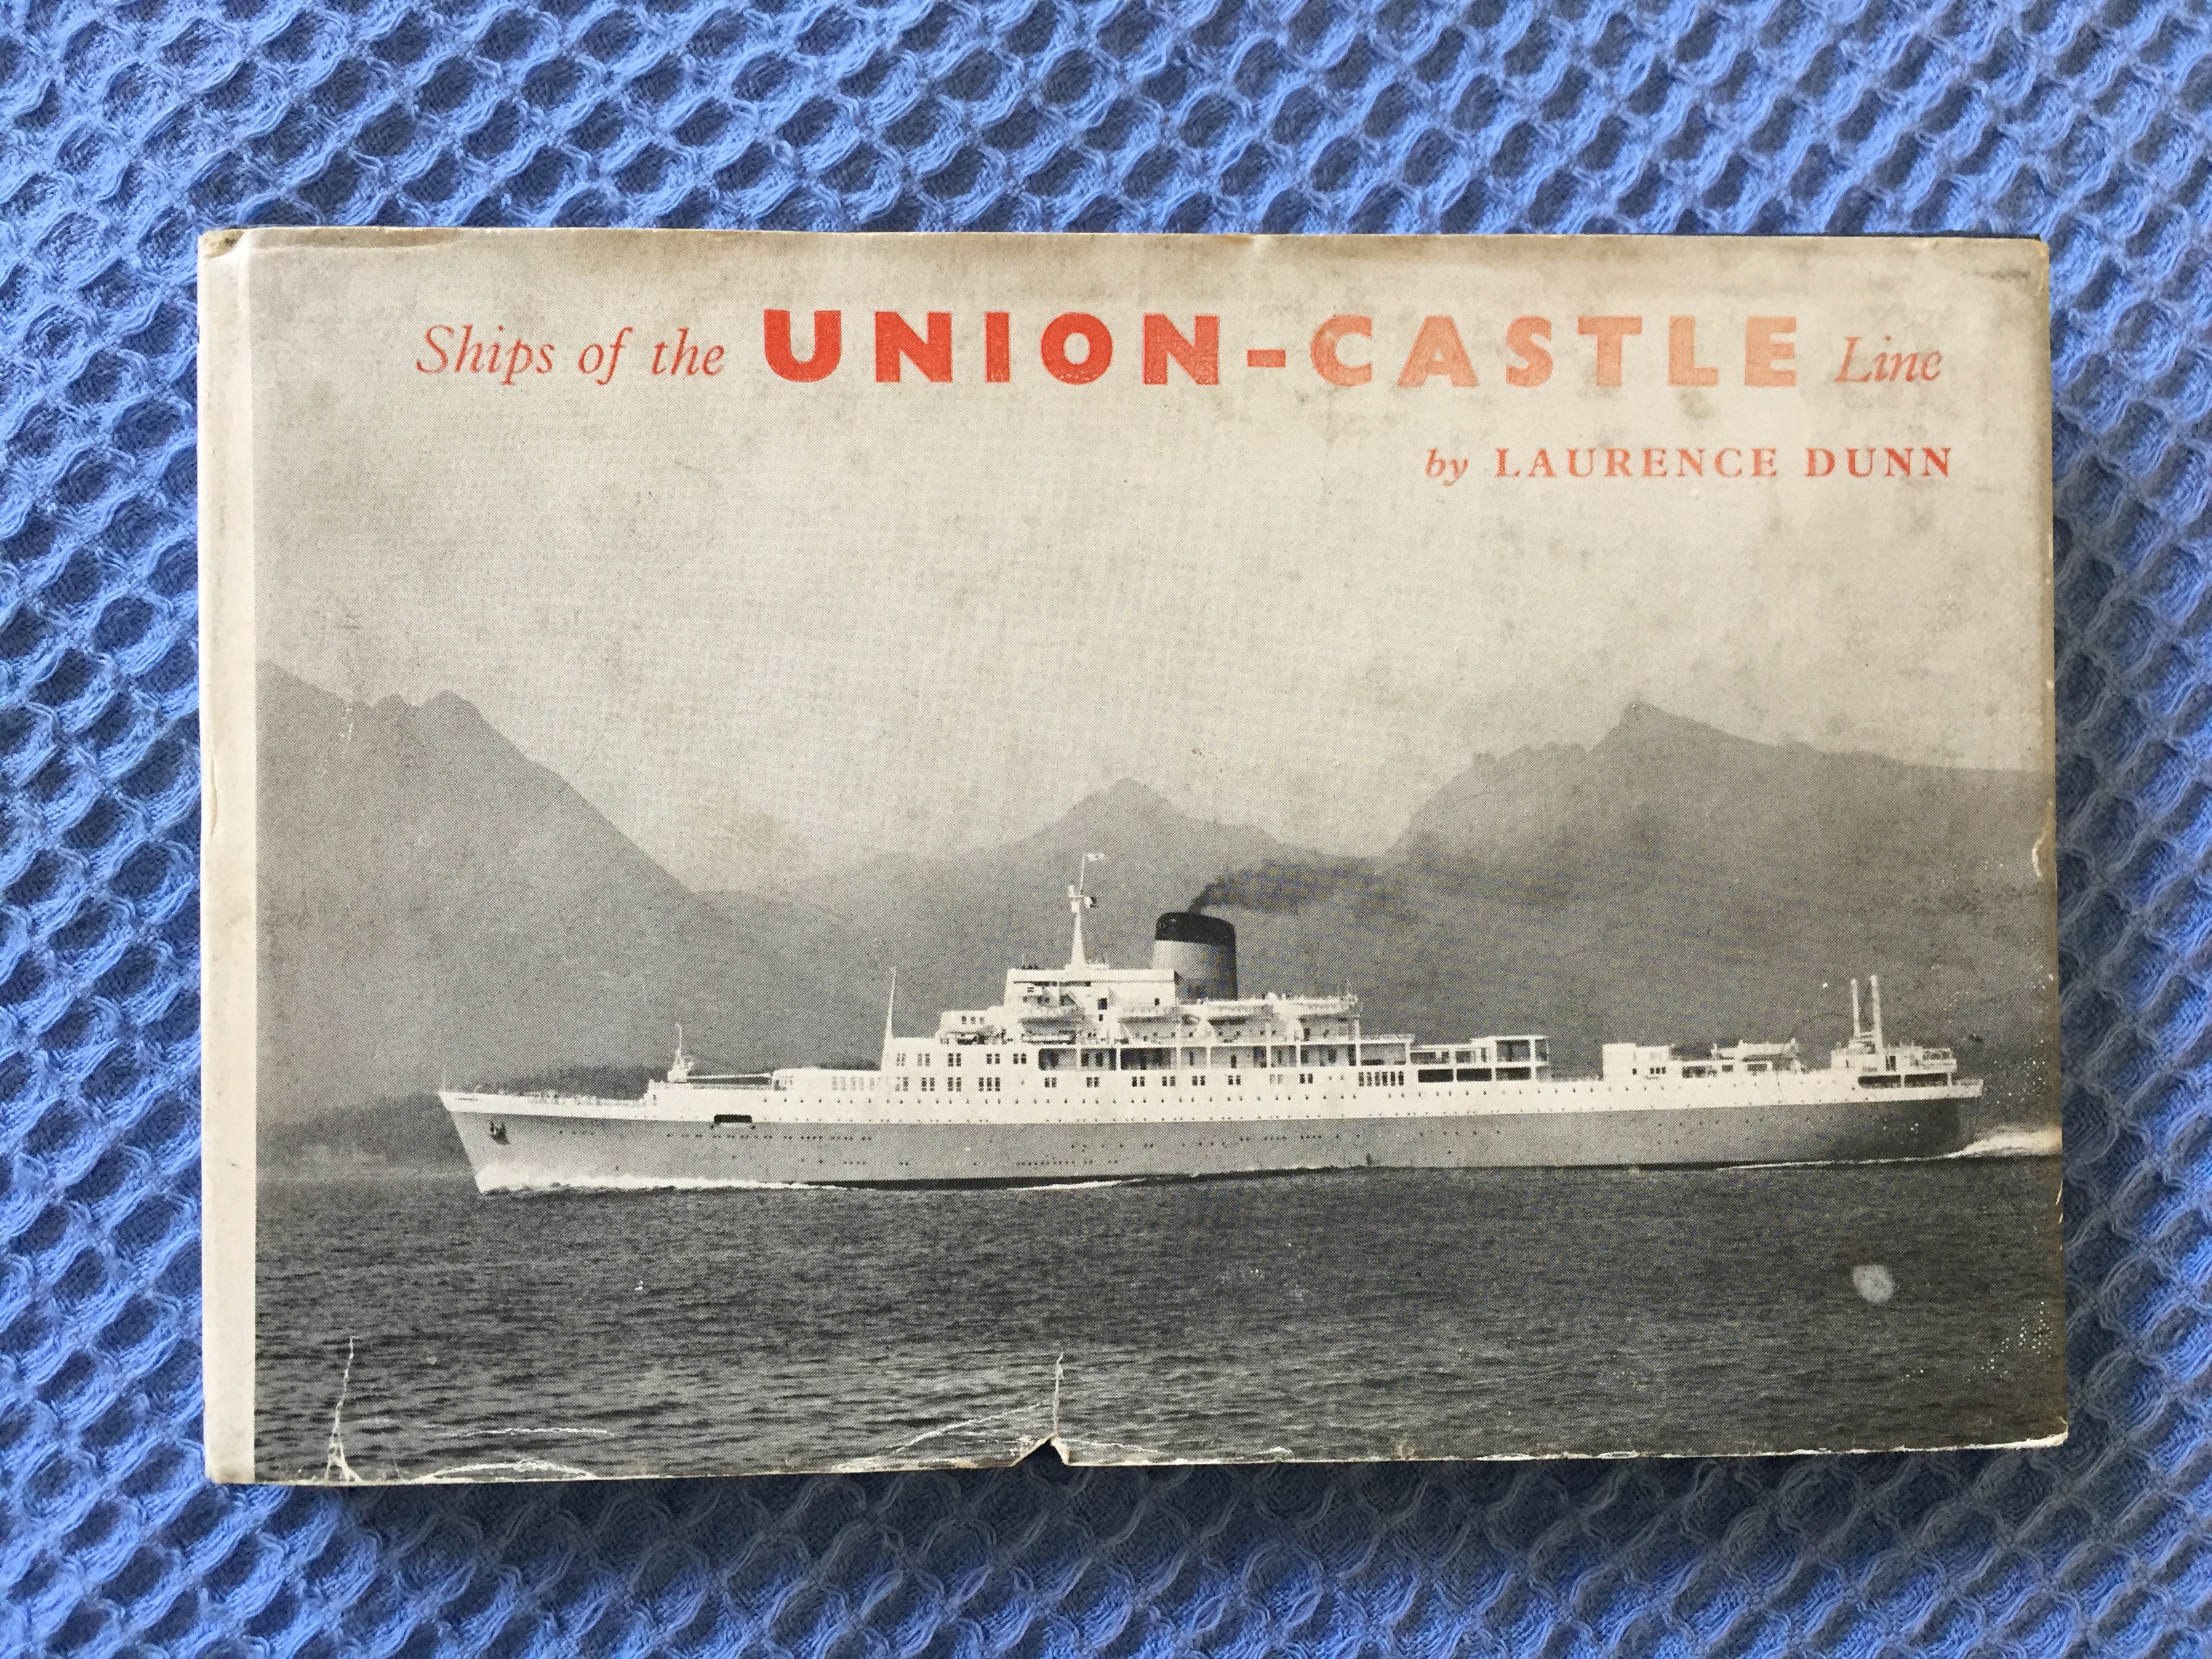 FANTASTIC OLD BOOK BY LAURENCE DUNN ENTITLED SHIPS OF THE UNION CASTLE LINE